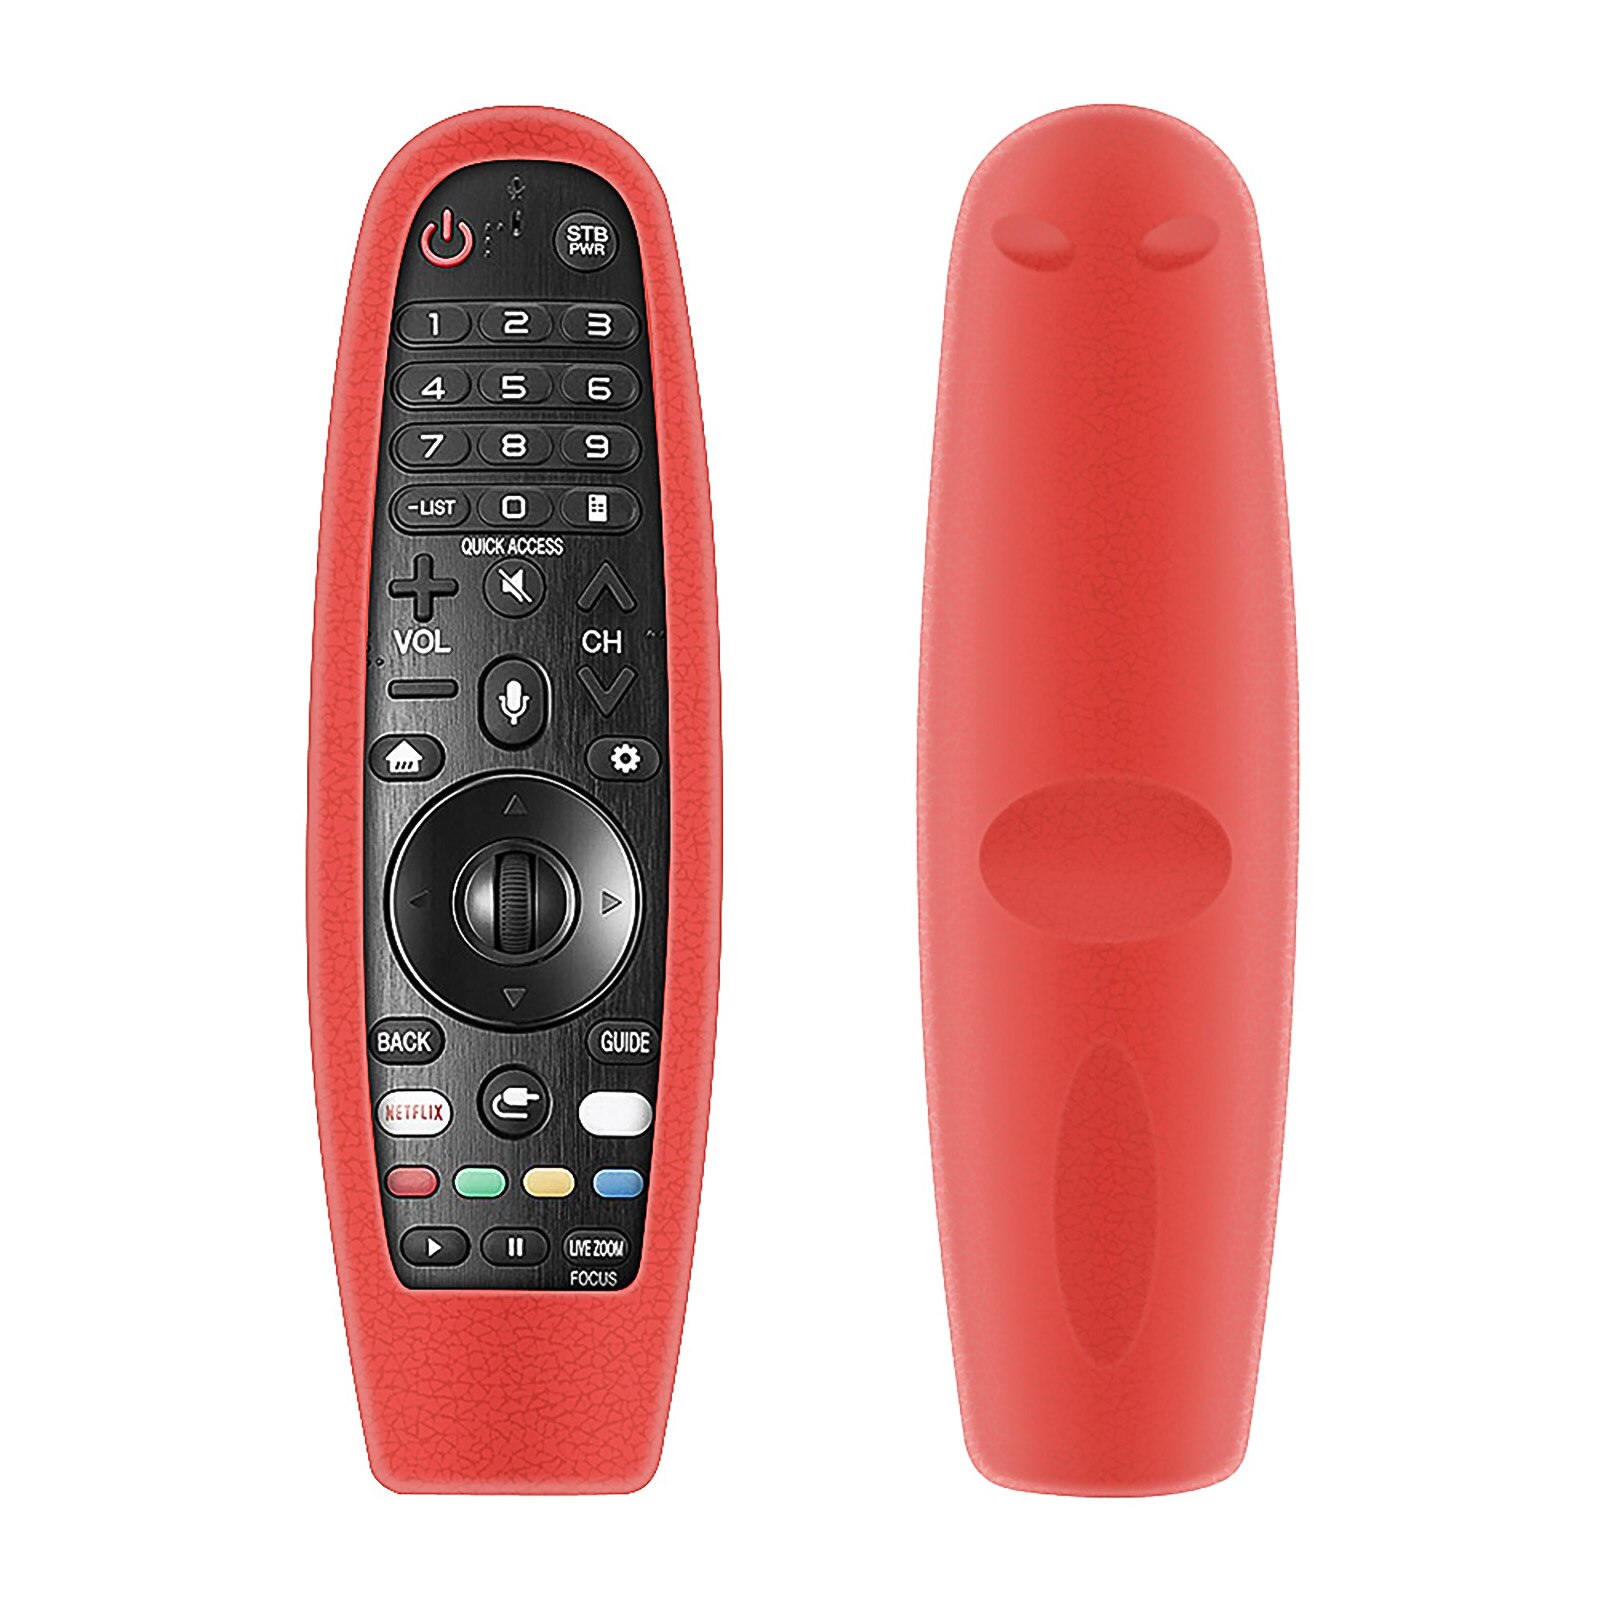 Protective Silicone Case For LG TV AN-MR600 650 AN-MR18BA MR19BA Magic Remote Control Cover Shockproof Washable Remote MR-18: Red